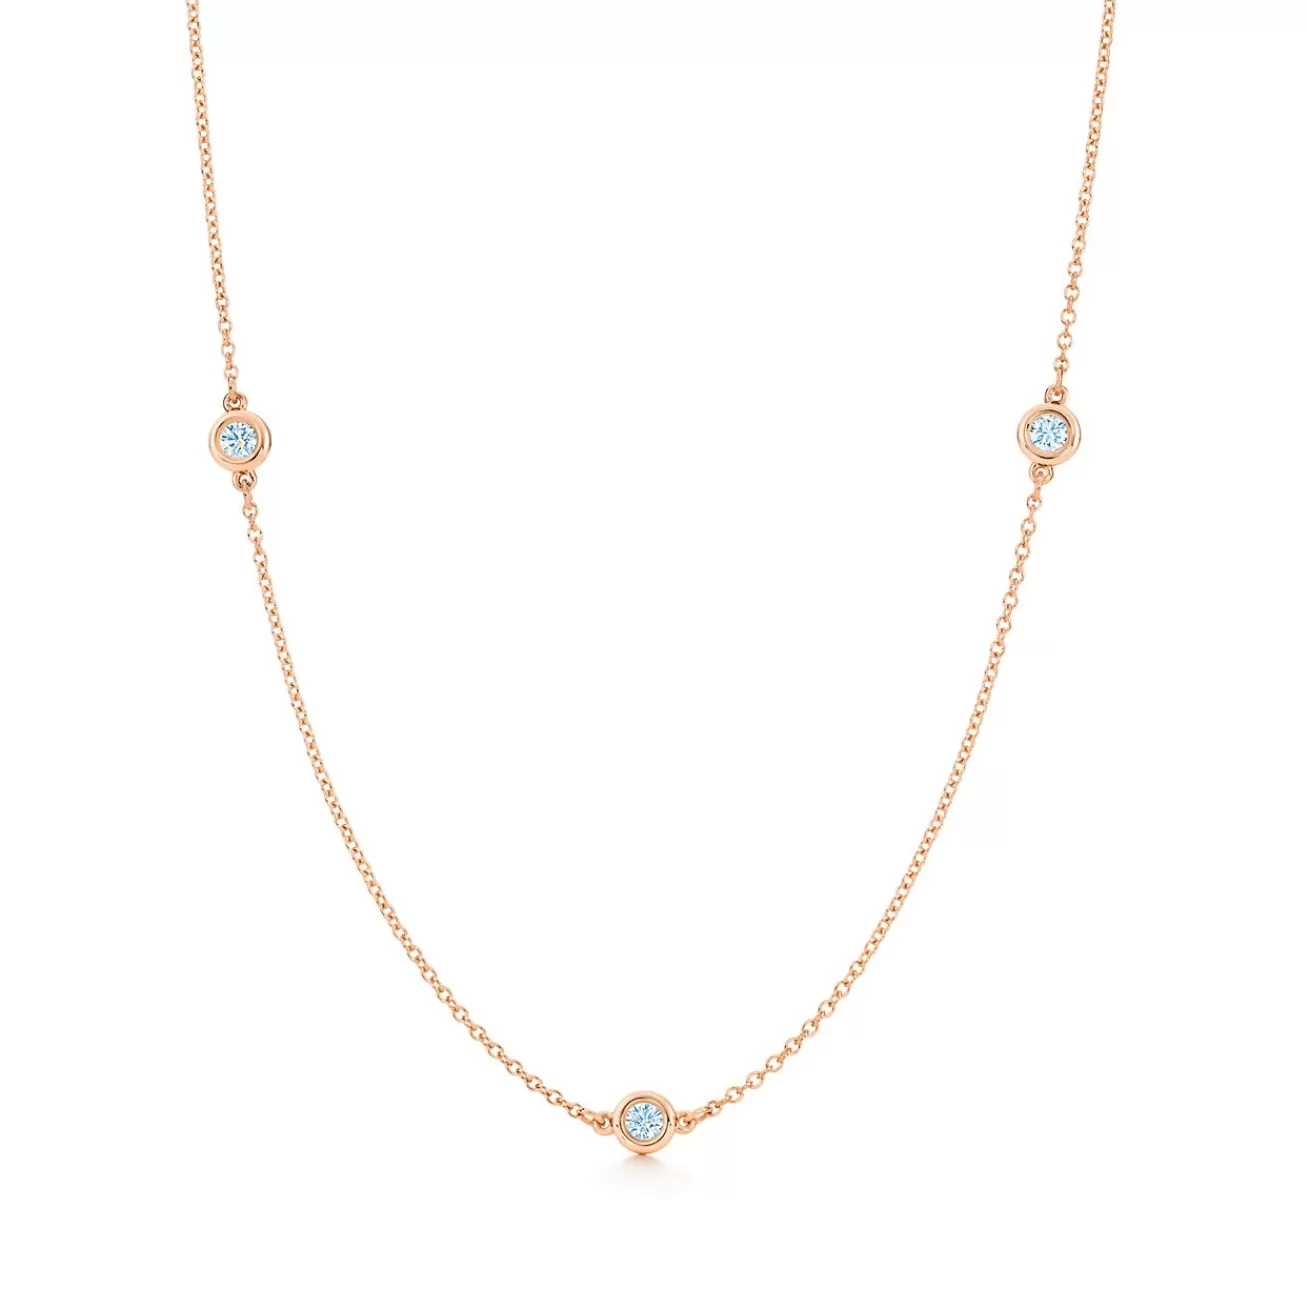 Tiffany & Co. Elsa Peretti® Diamonds by the Yard® necklace in 18k rose gold. | ^ Necklaces & Pendants | Rose Gold Jewelry